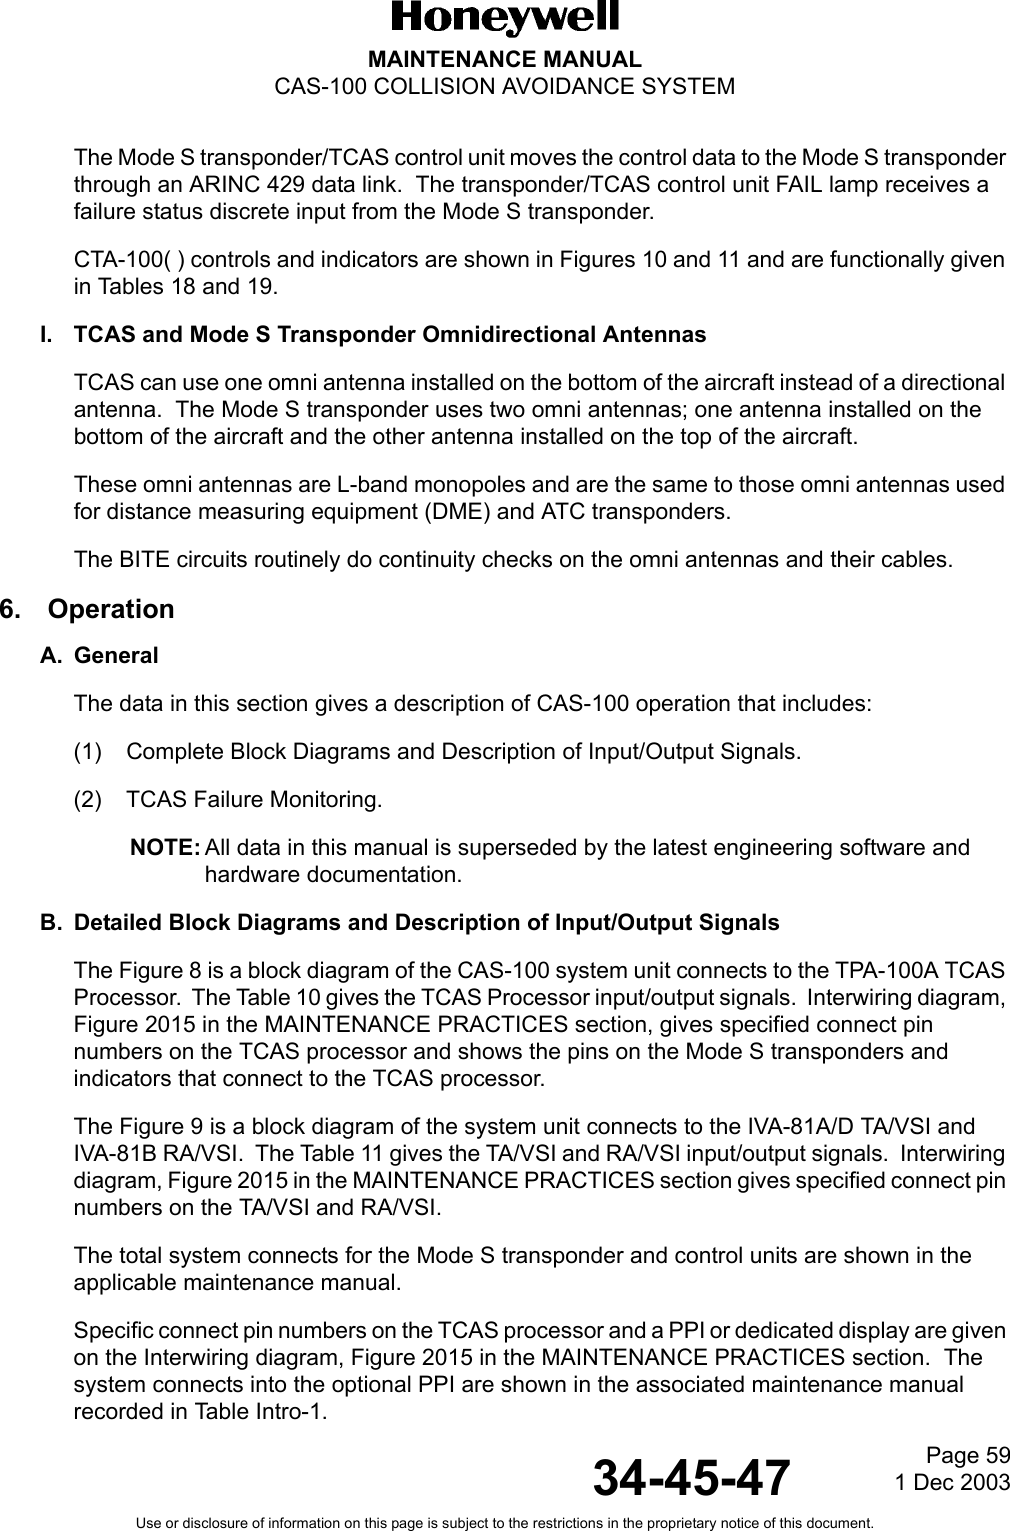 Page 591 Dec 200334-45-47MAINTENANCE MANUALCAS-100 COLLISION AVOIDANCE SYSTEMUse or disclosure of information on this page is subject to the restrictions in the proprietary notice of this document.The Mode S transponder/TCAS control unit moves the control data to the Mode S transponder through an ARINC 429 data link.  The transponder/TCAS control unit FAIL lamp receives a failure status discrete input from the Mode S transponder.CTA-100( ) controls and indicators are shown in Figures 10 and 11 and are functionally given in Tables 18 and 19.I. TCAS and Mode S Transponder Omnidirectional AntennasTCAS can use one omni antenna installed on the bottom of the aircraft instead of a directional antenna.  The Mode S transponder uses two omni antennas; one antenna installed on the bottom of the aircraft and the other antenna installed on the top of the aircraft.These omni antennas are L-band monopoles and are the same to those omni antennas used for distance measuring equipment (DME) and ATC transponders.The BITE circuits routinely do continuity checks on the omni antennas and their cables.6.  OperationA. GeneralThe data in this section gives a description of CAS-100 operation that includes:(1) Complete Block Diagrams and Description of Input/Output Signals.(2) TCAS Failure Monitoring.NOTE: All data in this manual is superseded by the latest engineering software and hardware documentation.B. Detailed Block Diagrams and Description of Input/Output SignalsThe Figure 8 is a block diagram of the CAS-100 system unit connects to the TPA-100A TCAS Processor.  The Table 10 gives the TCAS Processor input/output signals.  Interwiring diagram, Figure 2015 in the MAINTENANCE PRACTICES section, gives specified connect pin numbers on the TCAS processor and shows the pins on the Mode S transponders and indicators that connect to the TCAS processor.The Figure 9 is a block diagram of the system unit connects to the IVA-81A/D TA/VSI and IVA-81B RA/VSI.  The Table 11 gives the TA/VSI and RA/VSI input/output signals.  Interwiring diagram, Figure 2015 in the MAINTENANCE PRACTICES section gives specified connect pin numbers on the TA/VSI and RA/VSI.The total system connects for the Mode S transponder and control units are shown in the applicable maintenance manual.Specific connect pin numbers on the TCAS processor and a PPI or dedicated display are given on the Interwiring diagram, Figure 2015 in the MAINTENANCE PRACTICES section.  The system connects into the optional PPI are shown in the associated maintenance manual recorded in Table Intro-1.